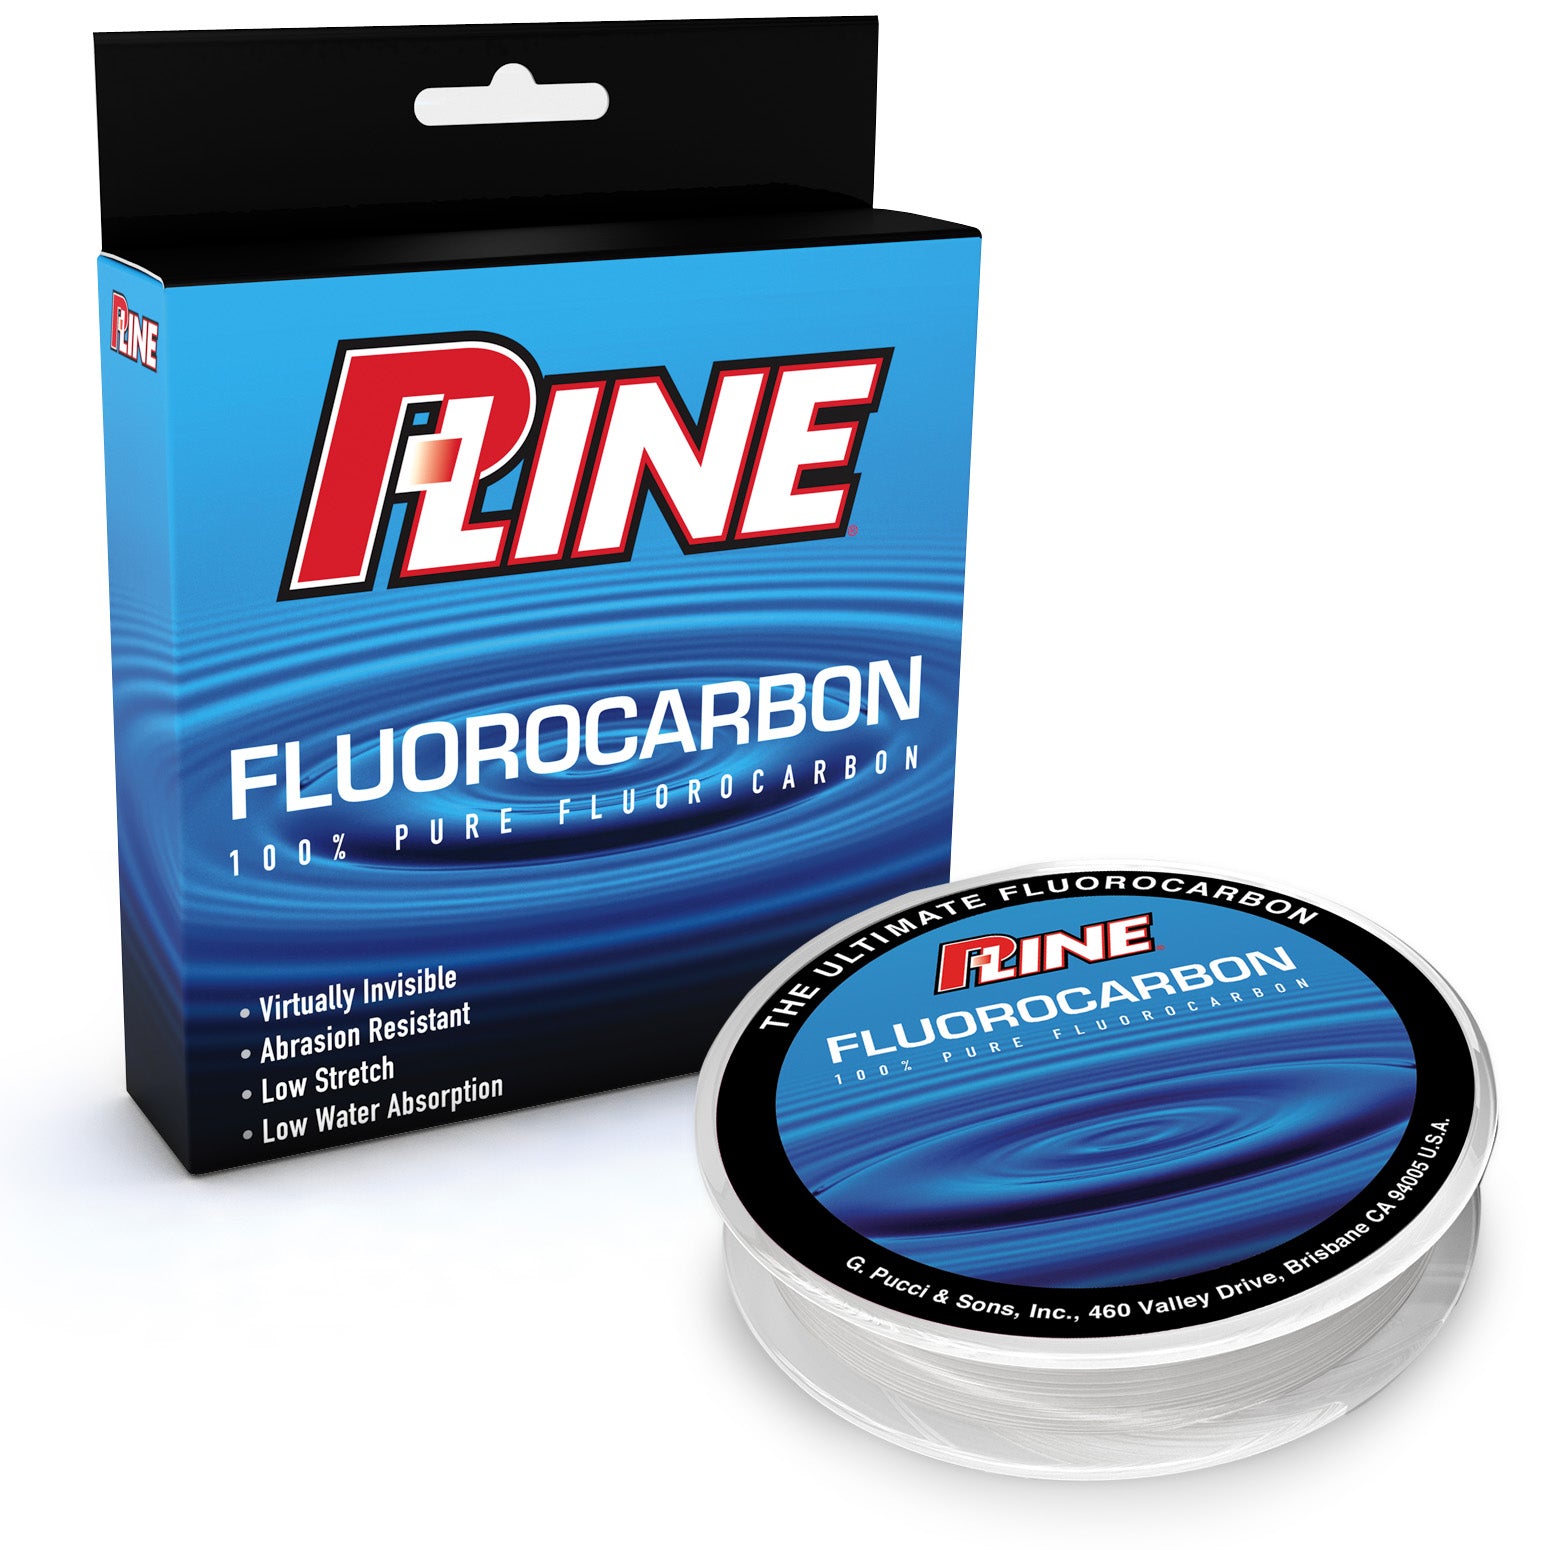 Triple Fish 4 lb Test Fluorocarbon Fishing Line, Clear, 0.18 mm/200 yd :  Buy Online at Best Price in KSA - Souq is now : Sporting Goods